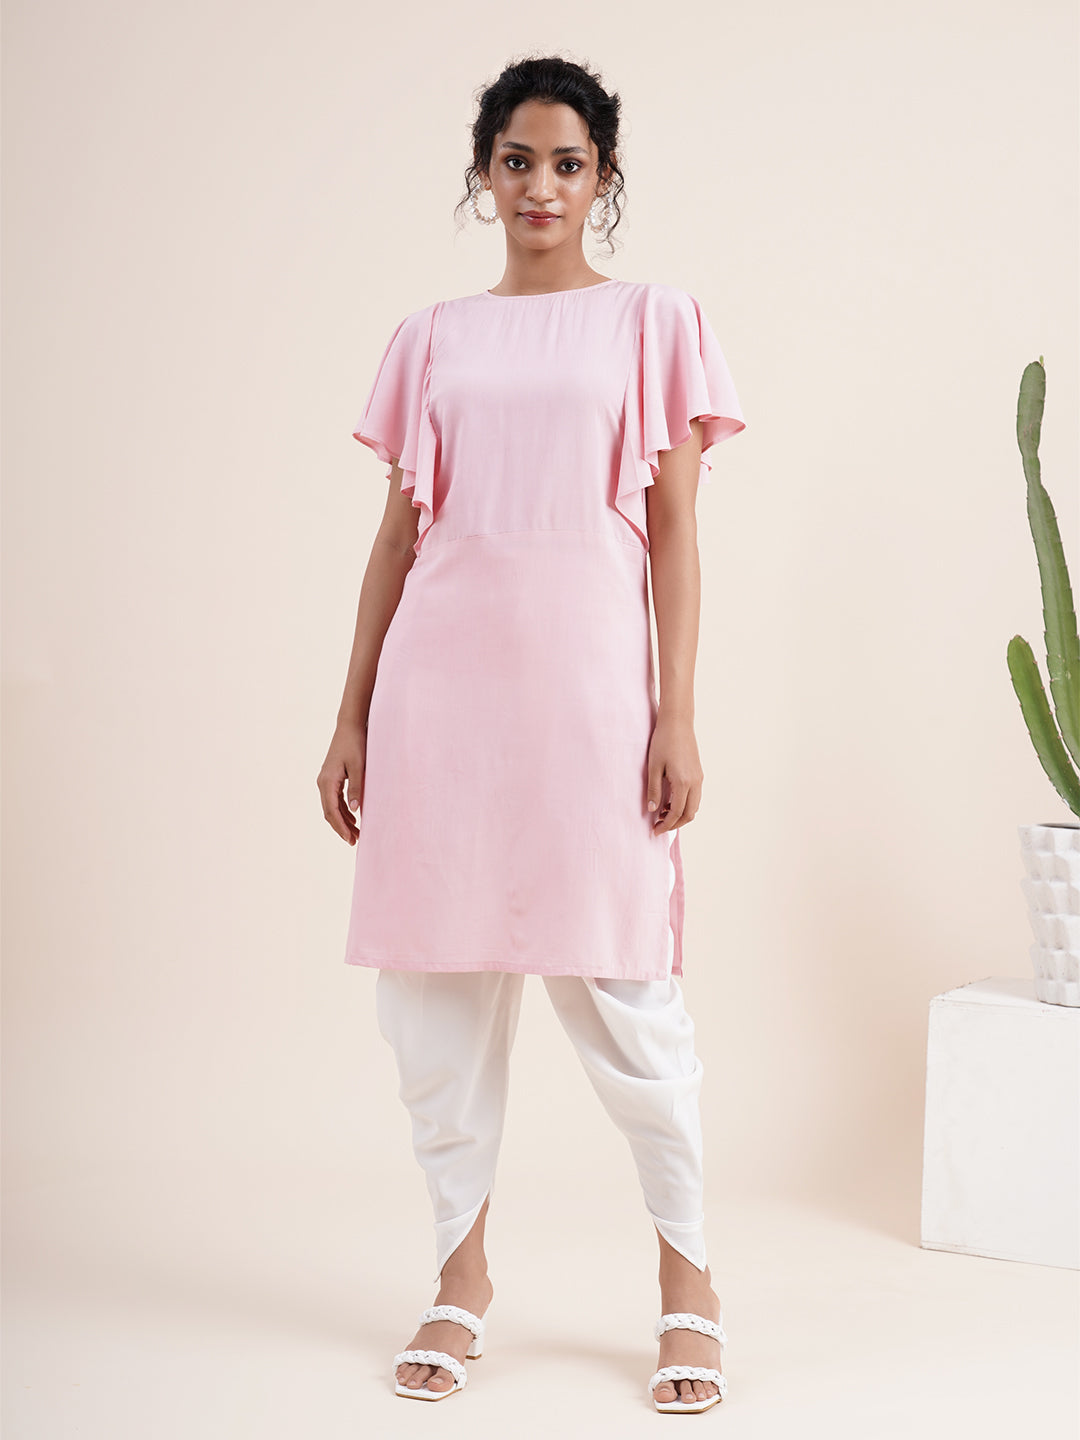 Pastel Pink Butterfly sleeved kurta paired with dhoti pants